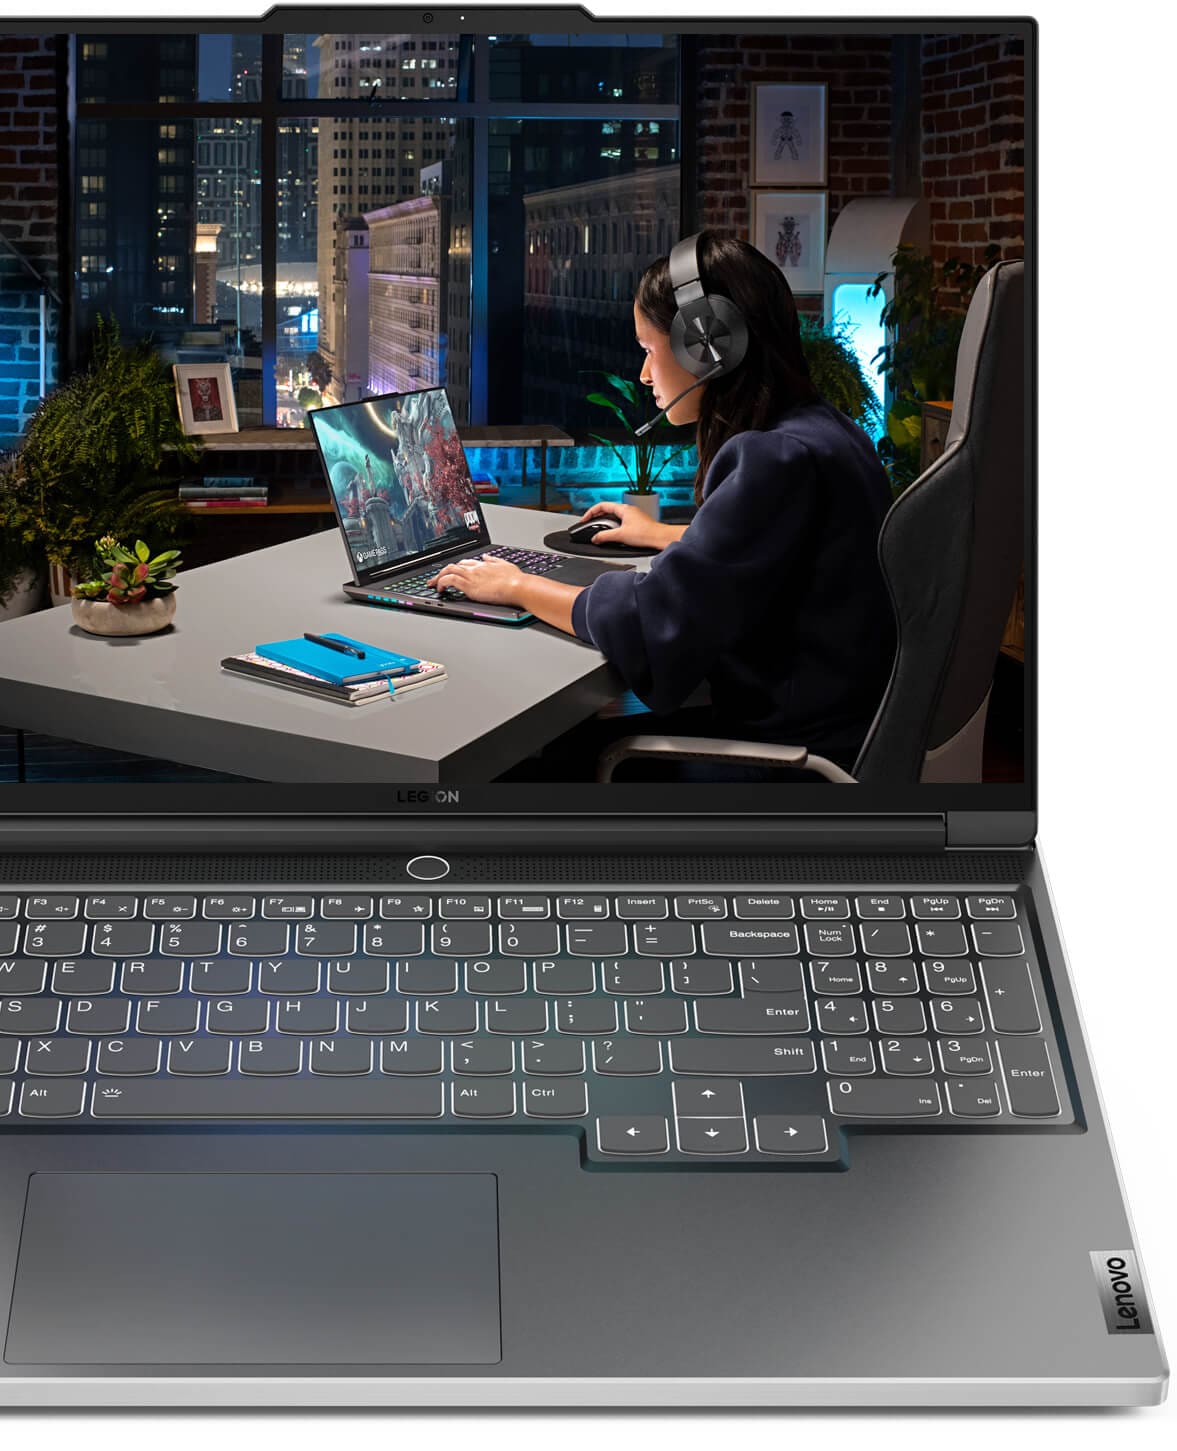 Lenovo Legion laptop with display showing image of young woman sitting at a table in an apartment room with windows overlooking a city at night as she plays a game on a Lenovo Legion laptop while wearing a Legion headset